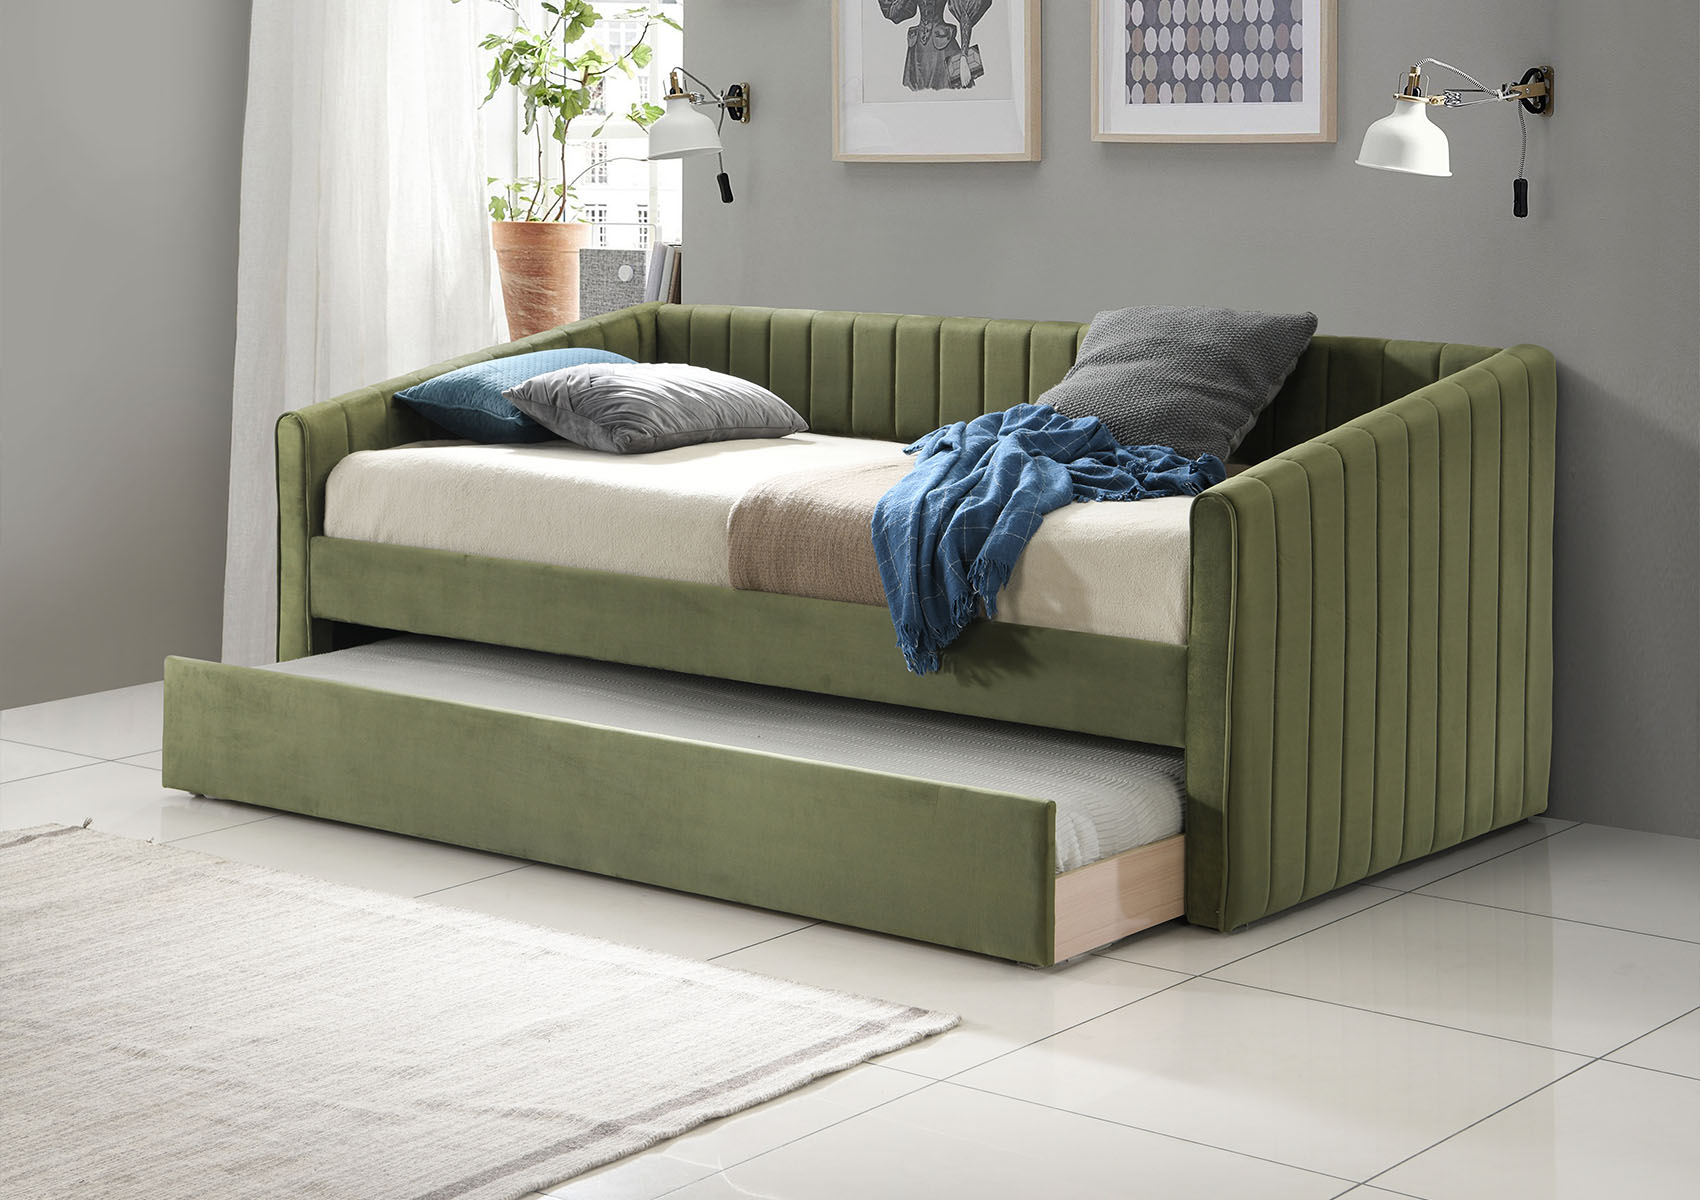 View Sanderson Olive Green Upholstered Day Bed Including Underbed Time4Sleep information